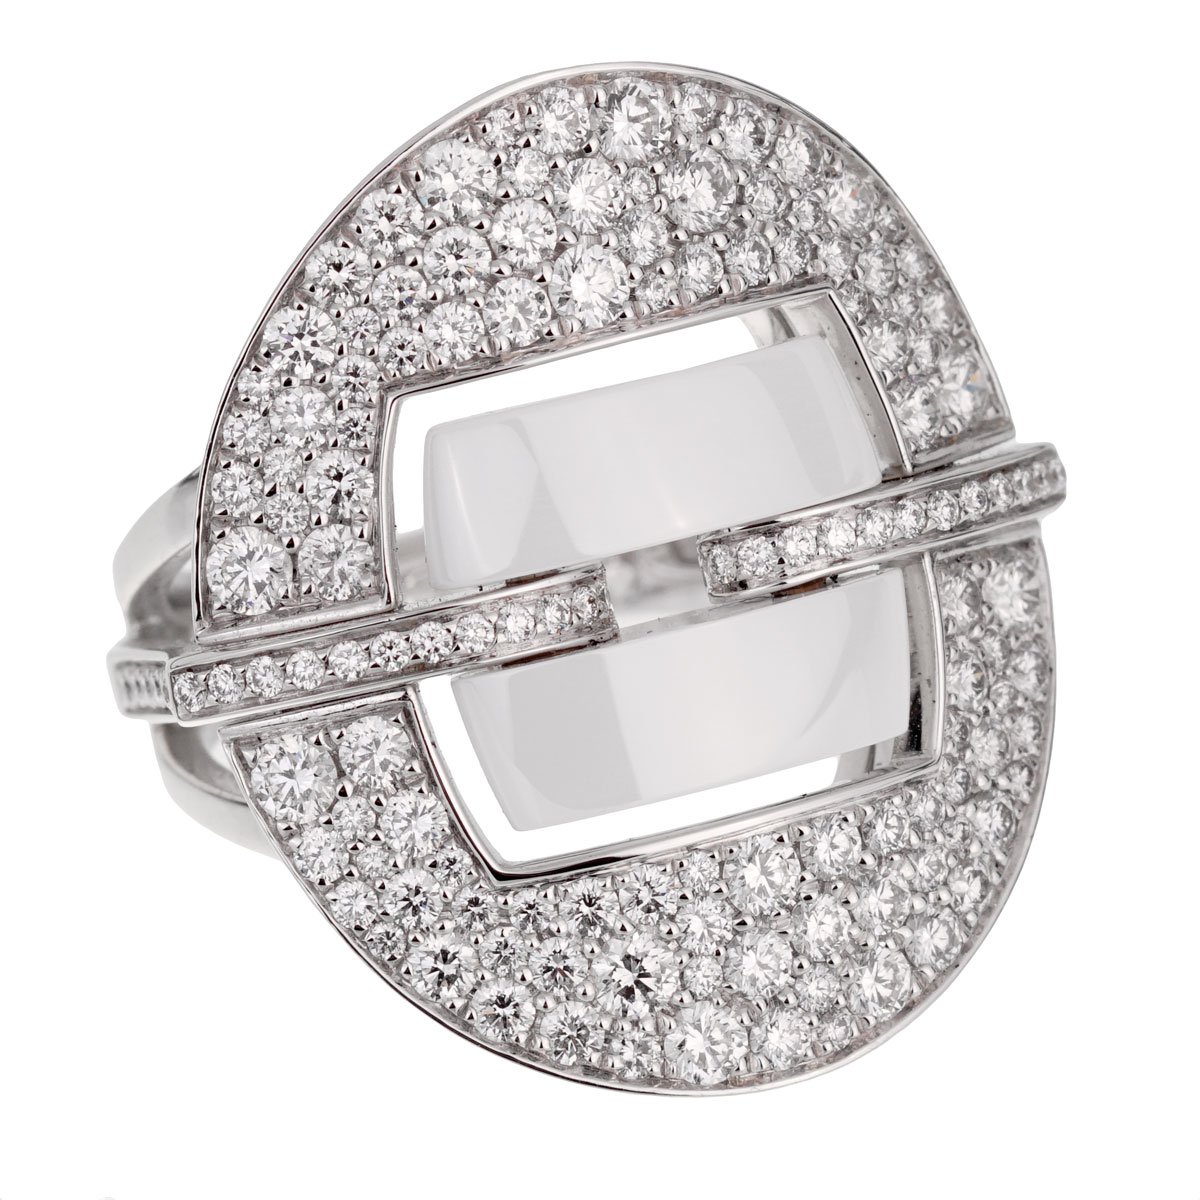 Chanel Pre-Owned Chanel 18K White Gold 0.78 ct Diamond Ring  CH01-040422-W-575 - Jomashop